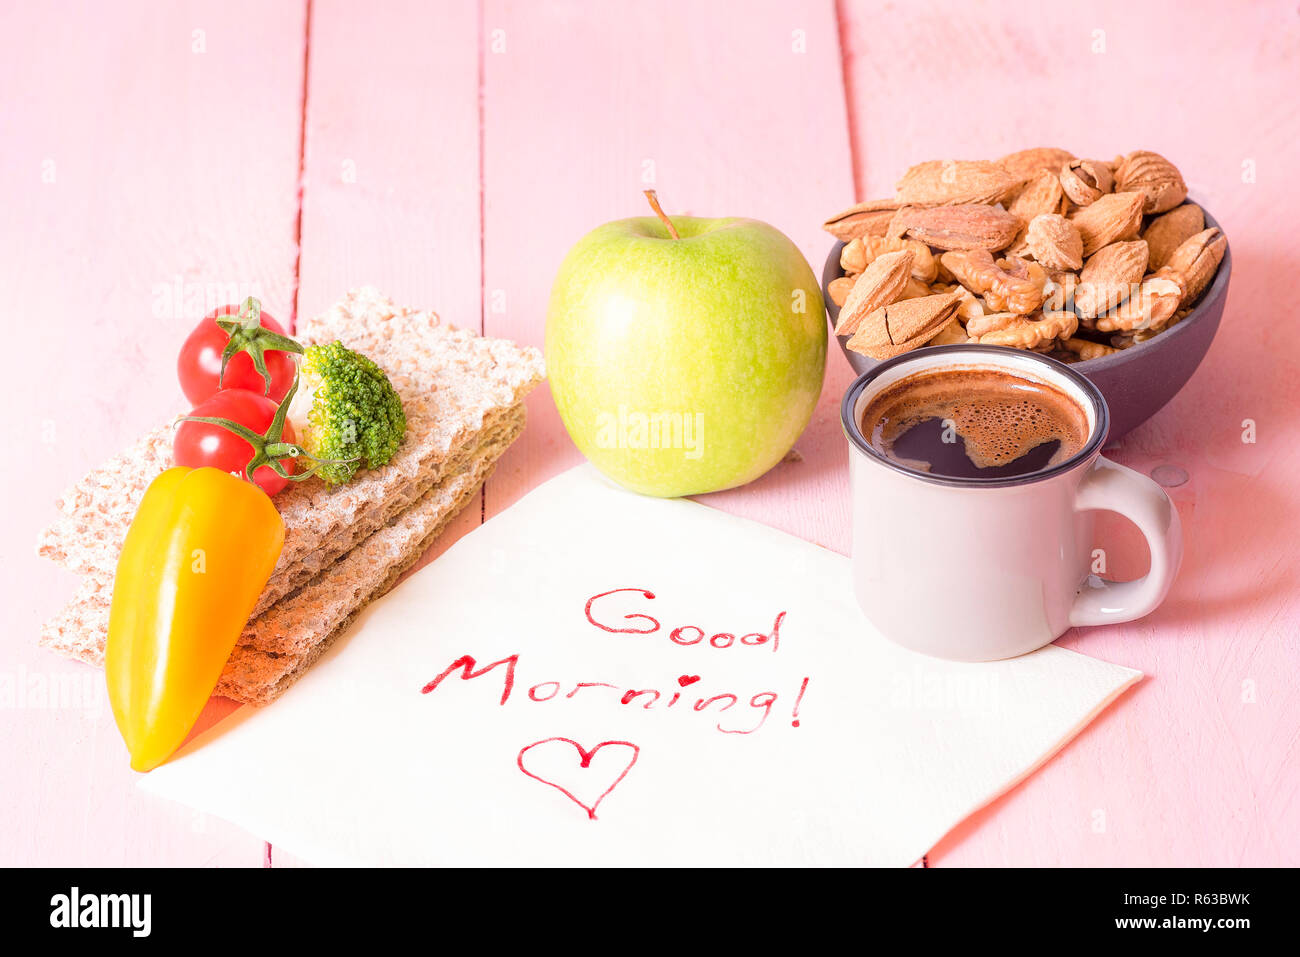 Healthy food and good morning text Stock Photo - Alamy